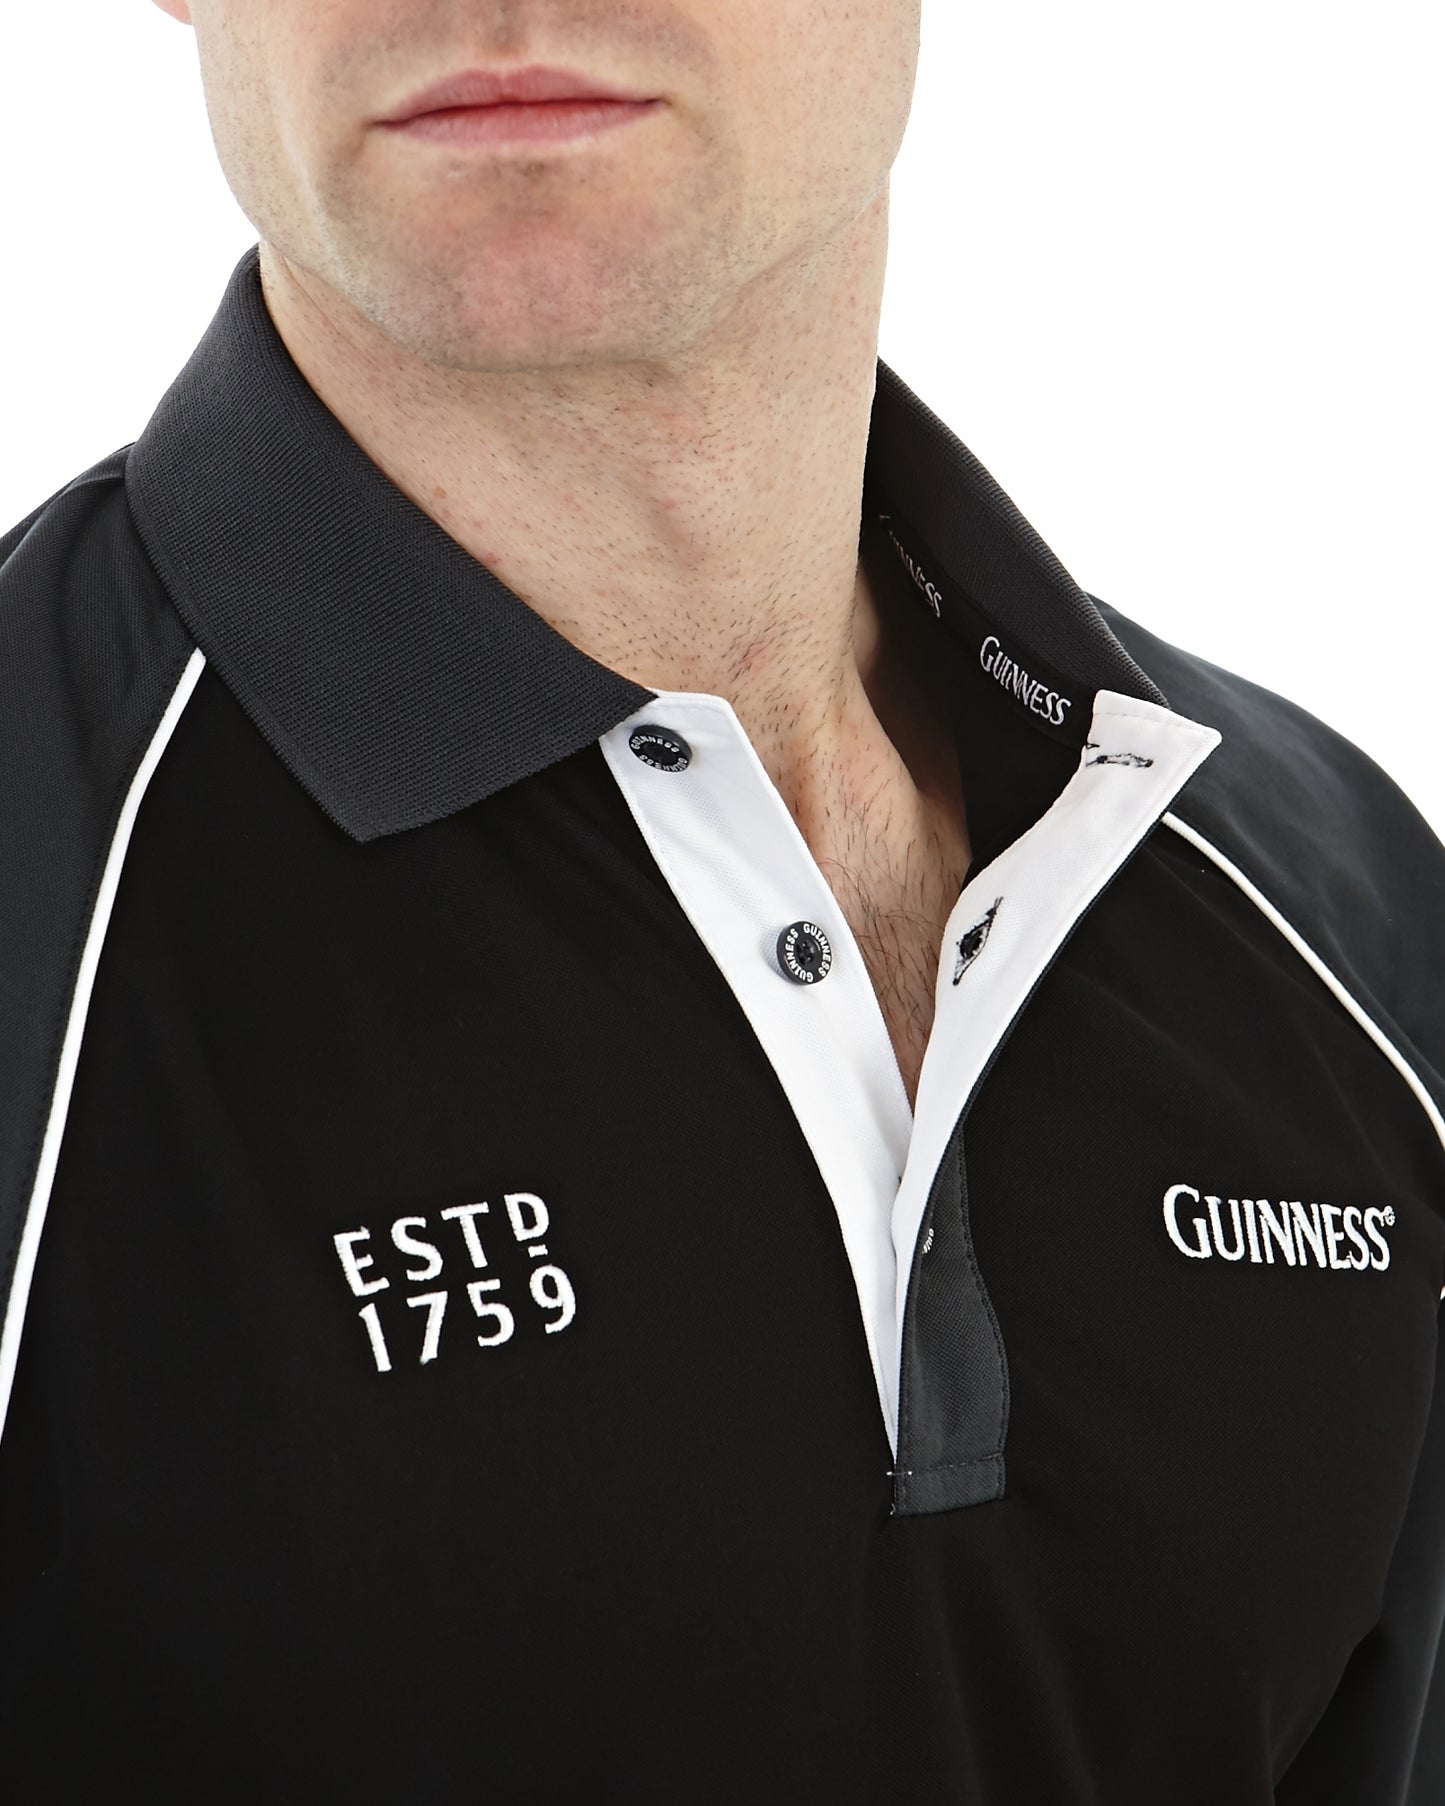 Guinness UK PERFORMANCE POLO SHIRT for the golf course.